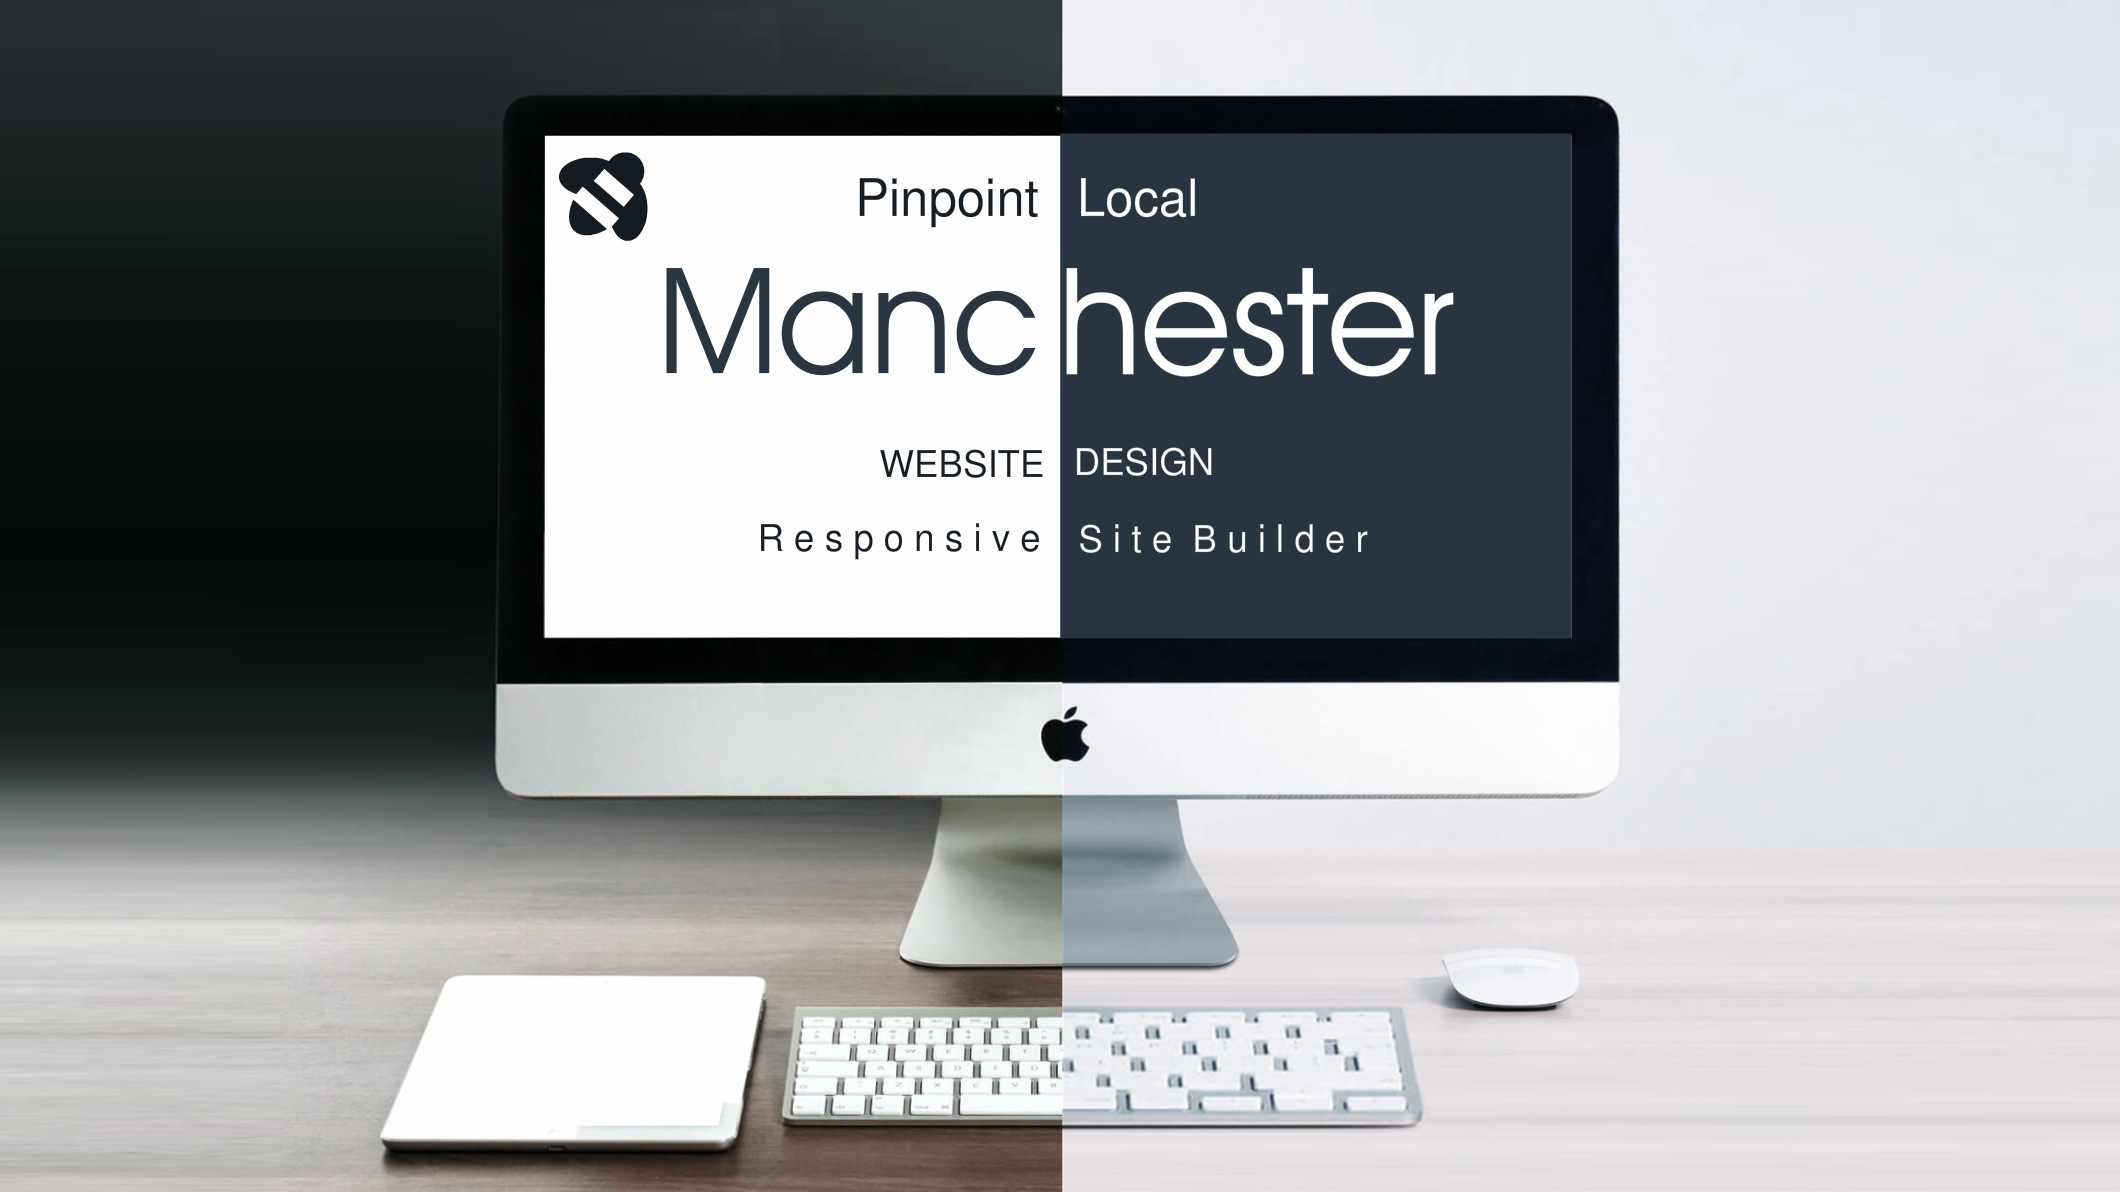 PinPoint Local Manchester